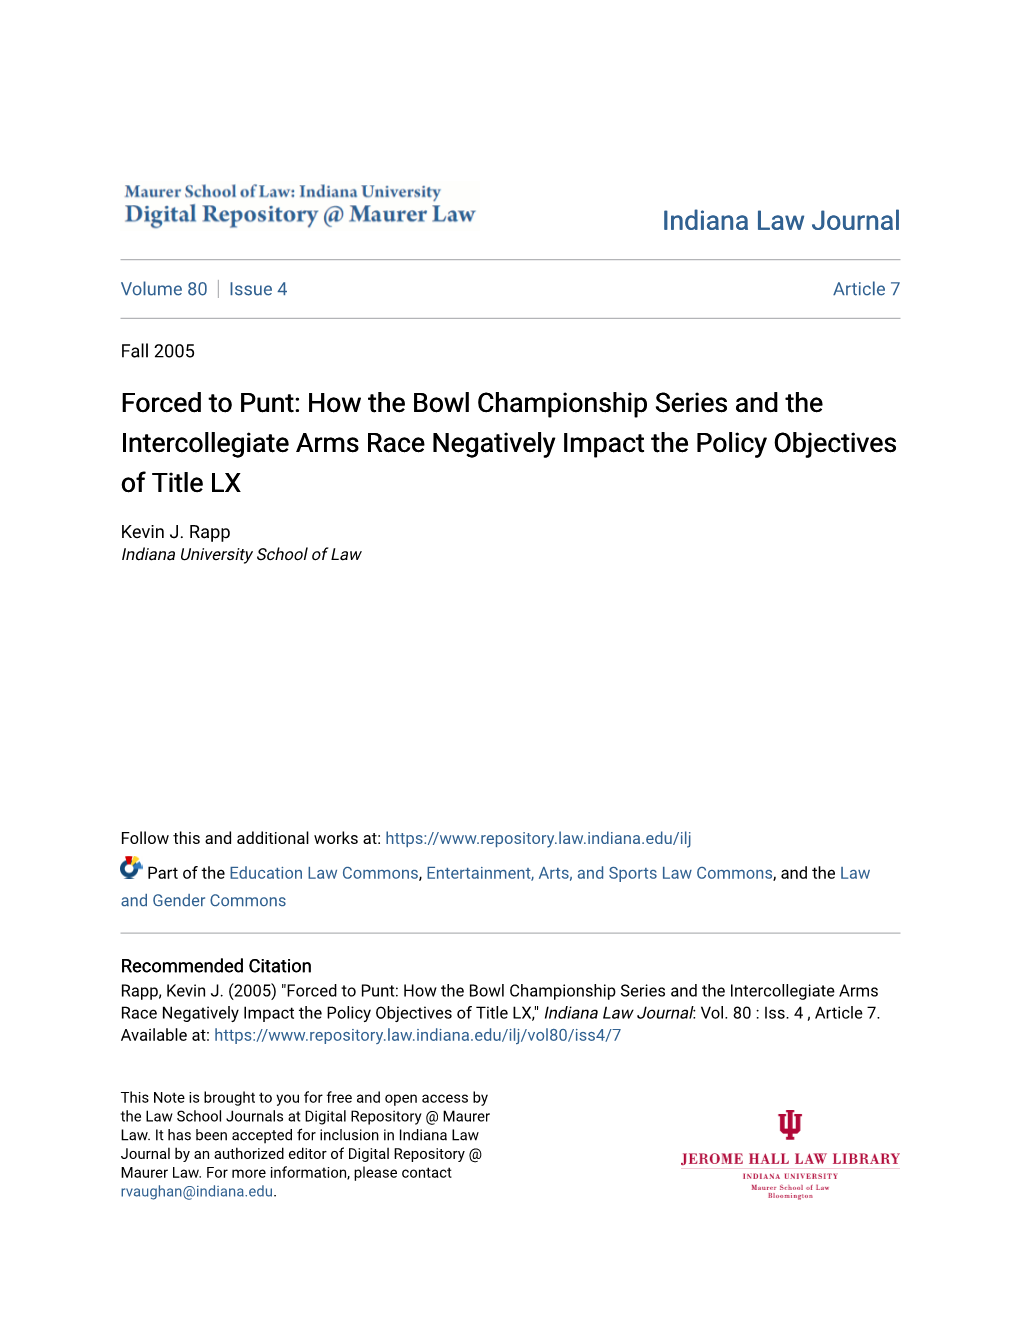 How the Bowl Championship Series and the Intercollegiate Arms Race Negatively Impact the Policy Objectives of Title LX